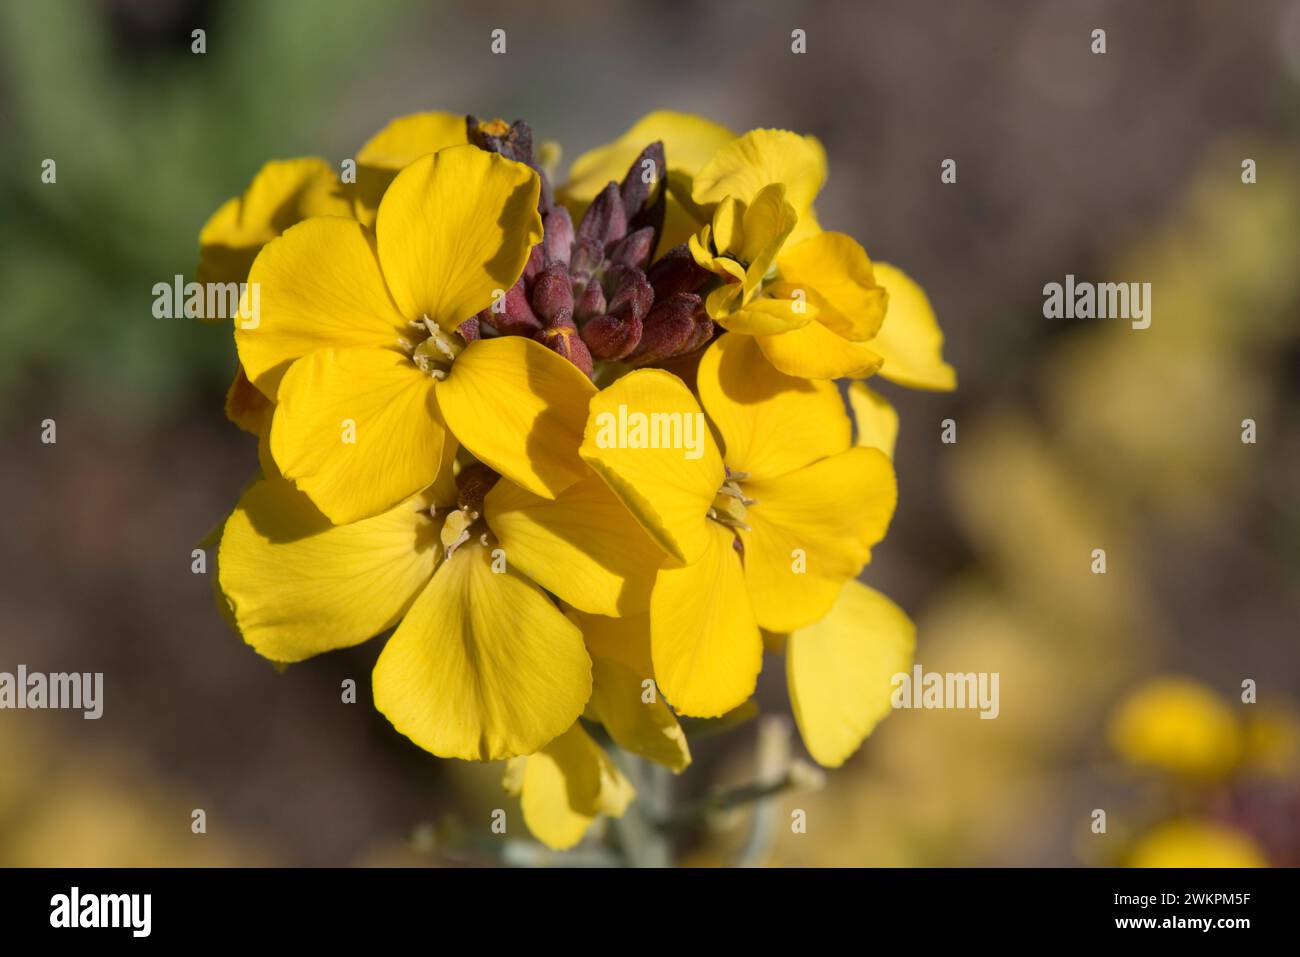 Erysimum cheiri 'Fragrant Star' a perennial wallflower with yellow flowers and variegated leaves with yellow cream margins, Berkshire, June Stock Photo